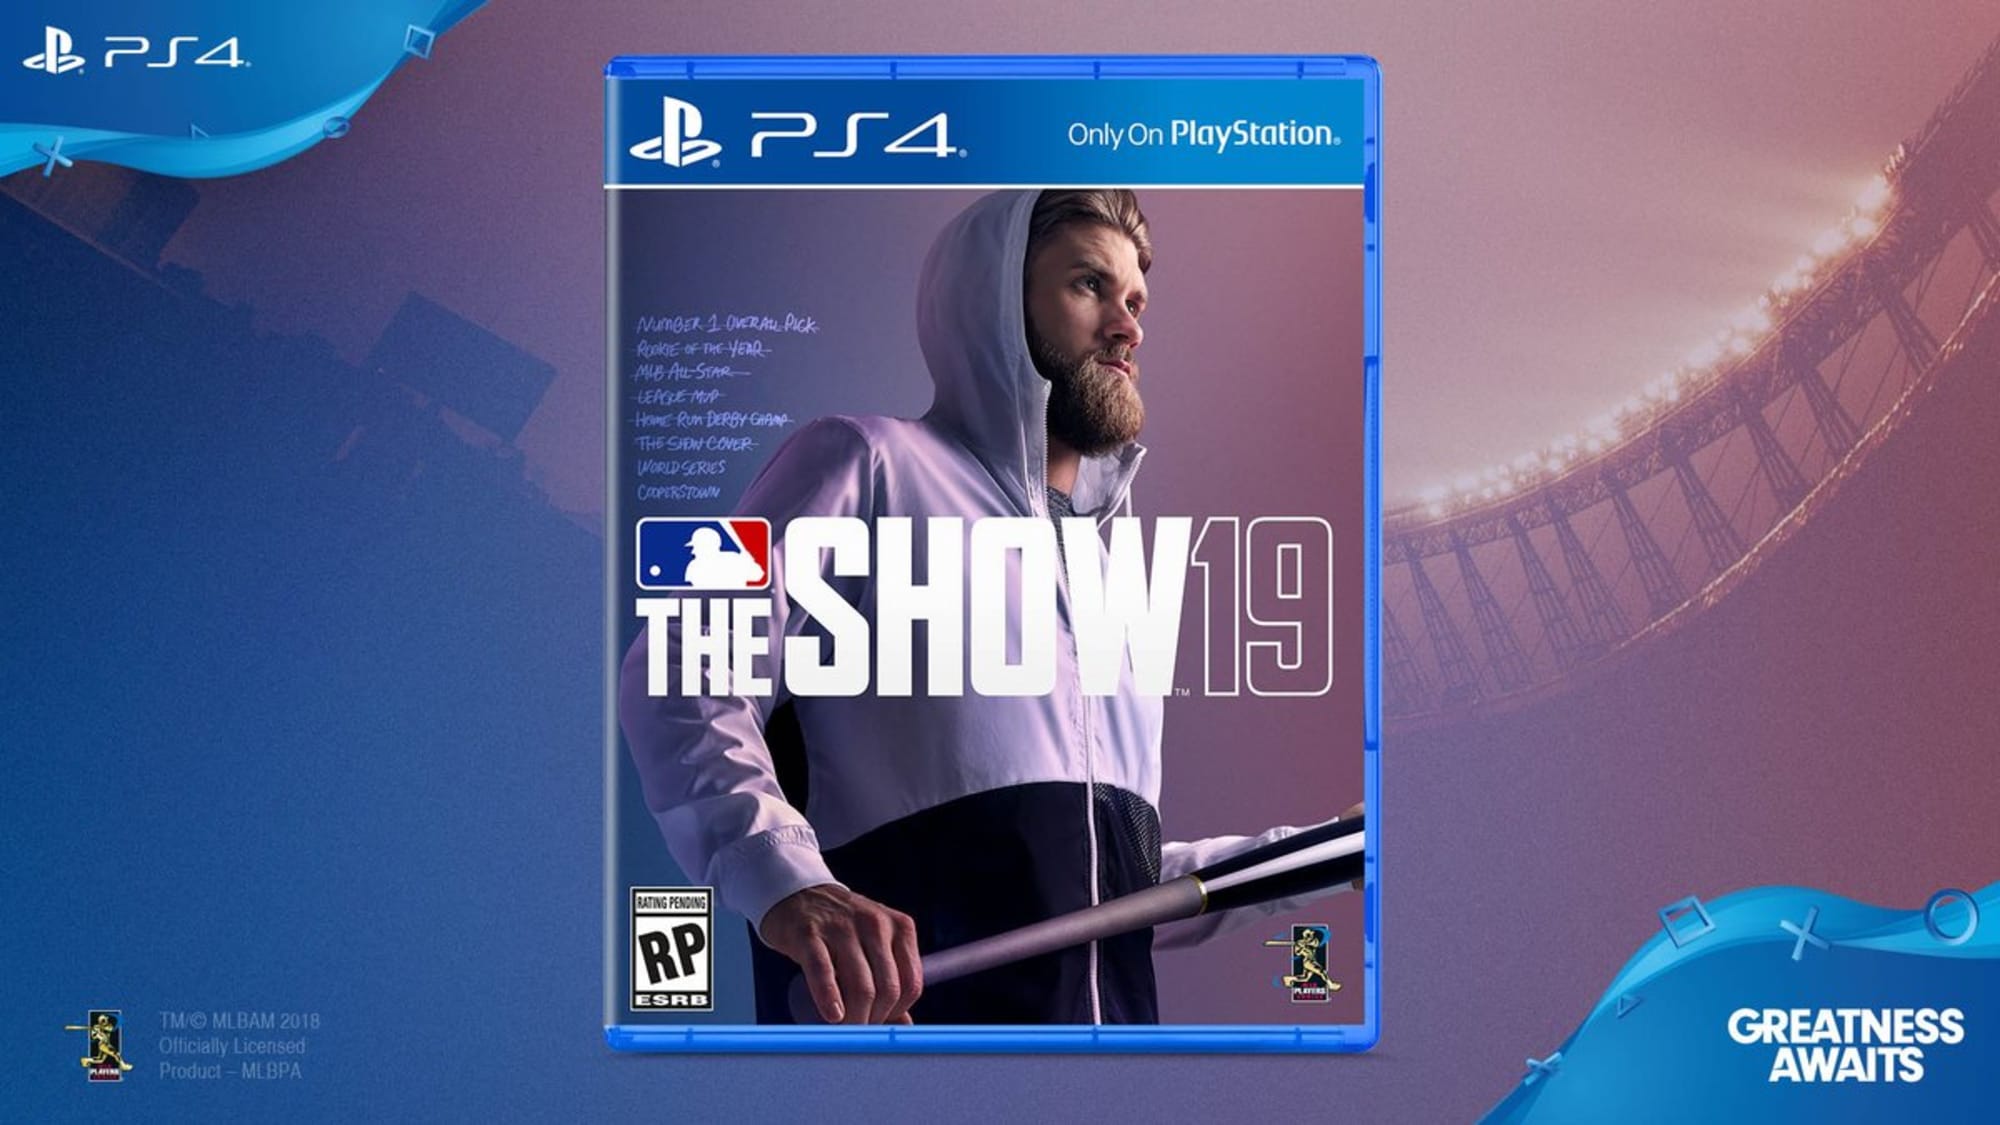 MLB The Show 19: Ranking The Last 10 Cover Athletes